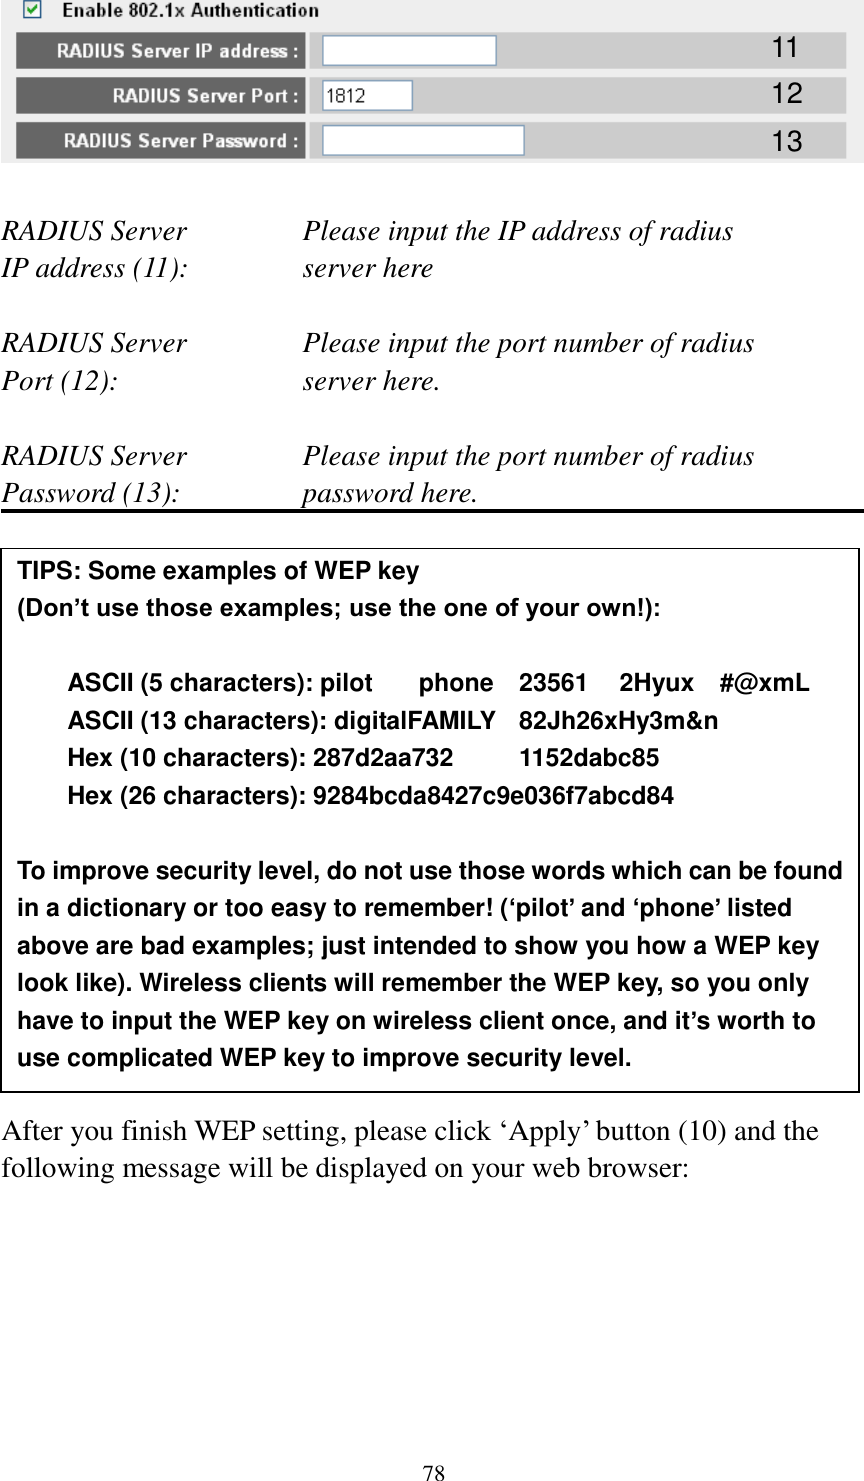 78   RADIUS Server      Please input the IP address of radius   IP address (11):      server here  RADIUS Server      Please input the port number of radius Port (12):        server here.  RADIUS Server      Please input the port number of radius Password (13):      password here.                 After you finish WEP setting, please click „Apply‟ button (10) and the following message will be displayed on your web browser:  11 12 13 TIPS: Some examples of WEP key   (Don’t use those examples; use the one of your own!):  ASCII (5 characters): pilot    phone    23561    2Hyux    #@xmL ASCII (13 characters): digitalFAMILY   82Jh26xHy3m&amp;n Hex (10 characters): 287d2aa732    1152dabc85 Hex (26 characters): 9284bcda8427c9e036f7abcd84  To improve security level, do not use those words which can be found in a dictionary or too easy to remember! (‘pilot’ and ‘phone’ listed above are bad examples; just intended to show you how a WEP key look like). Wireless clients will remember the WEP key, so you only have to input the WEP key on wireless client once, and it’s worth to use complicated WEP key to improve security level. 